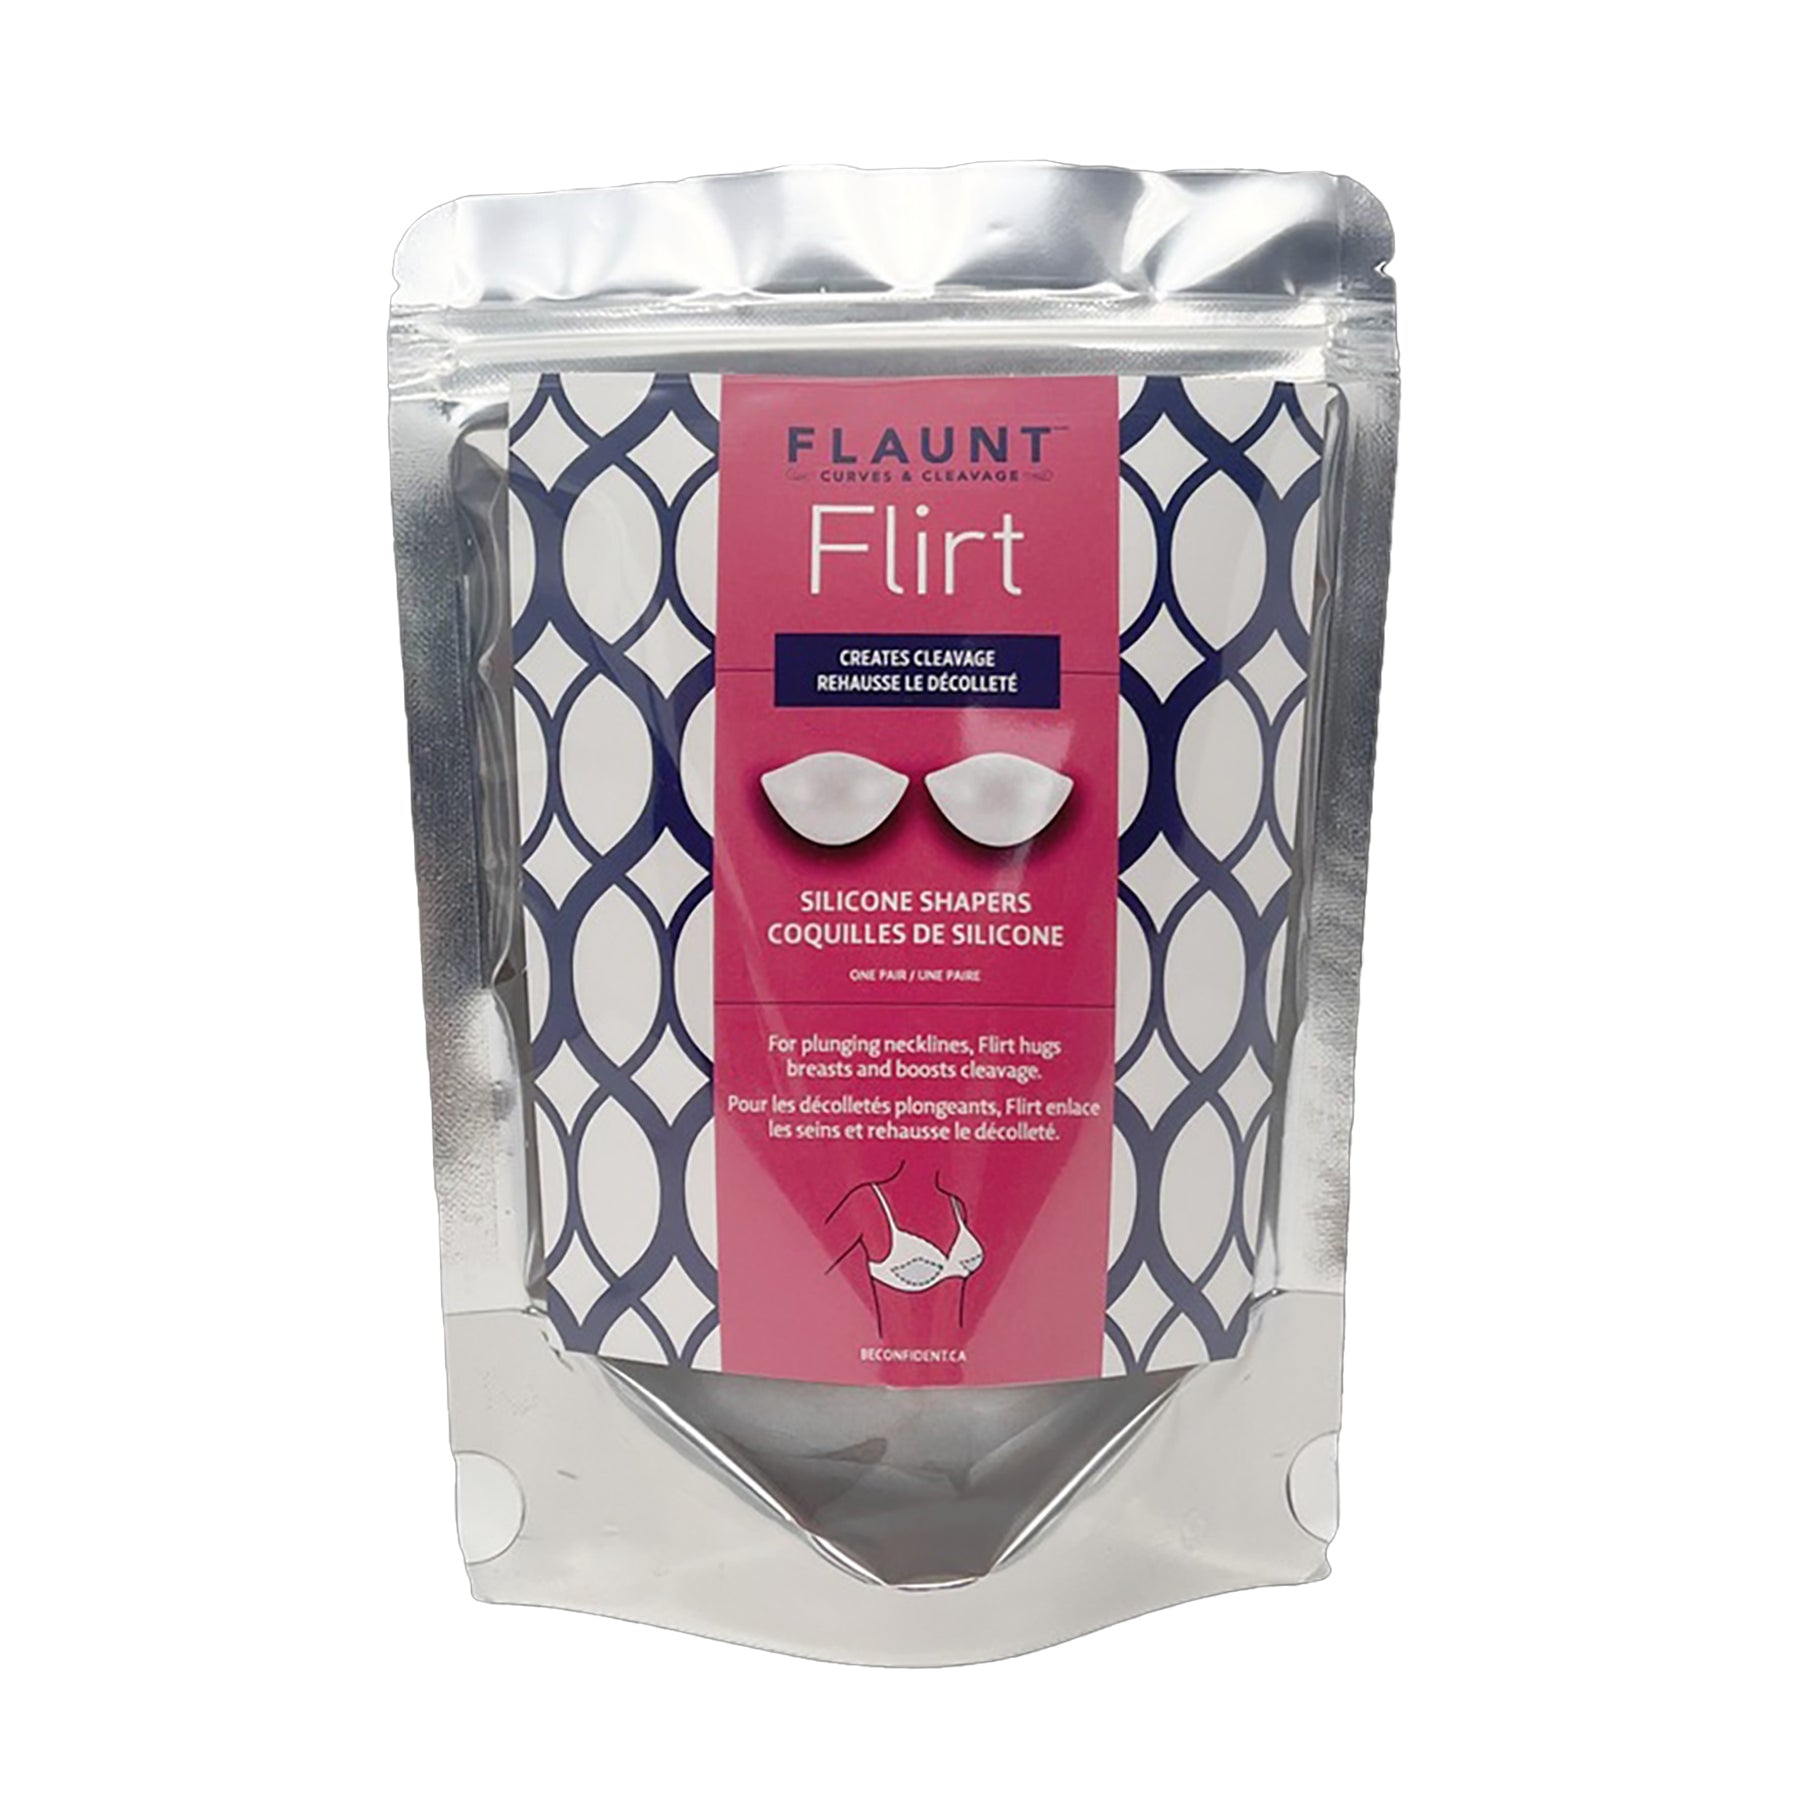 BeConfident Flaunt Flirt Silicone Shapers